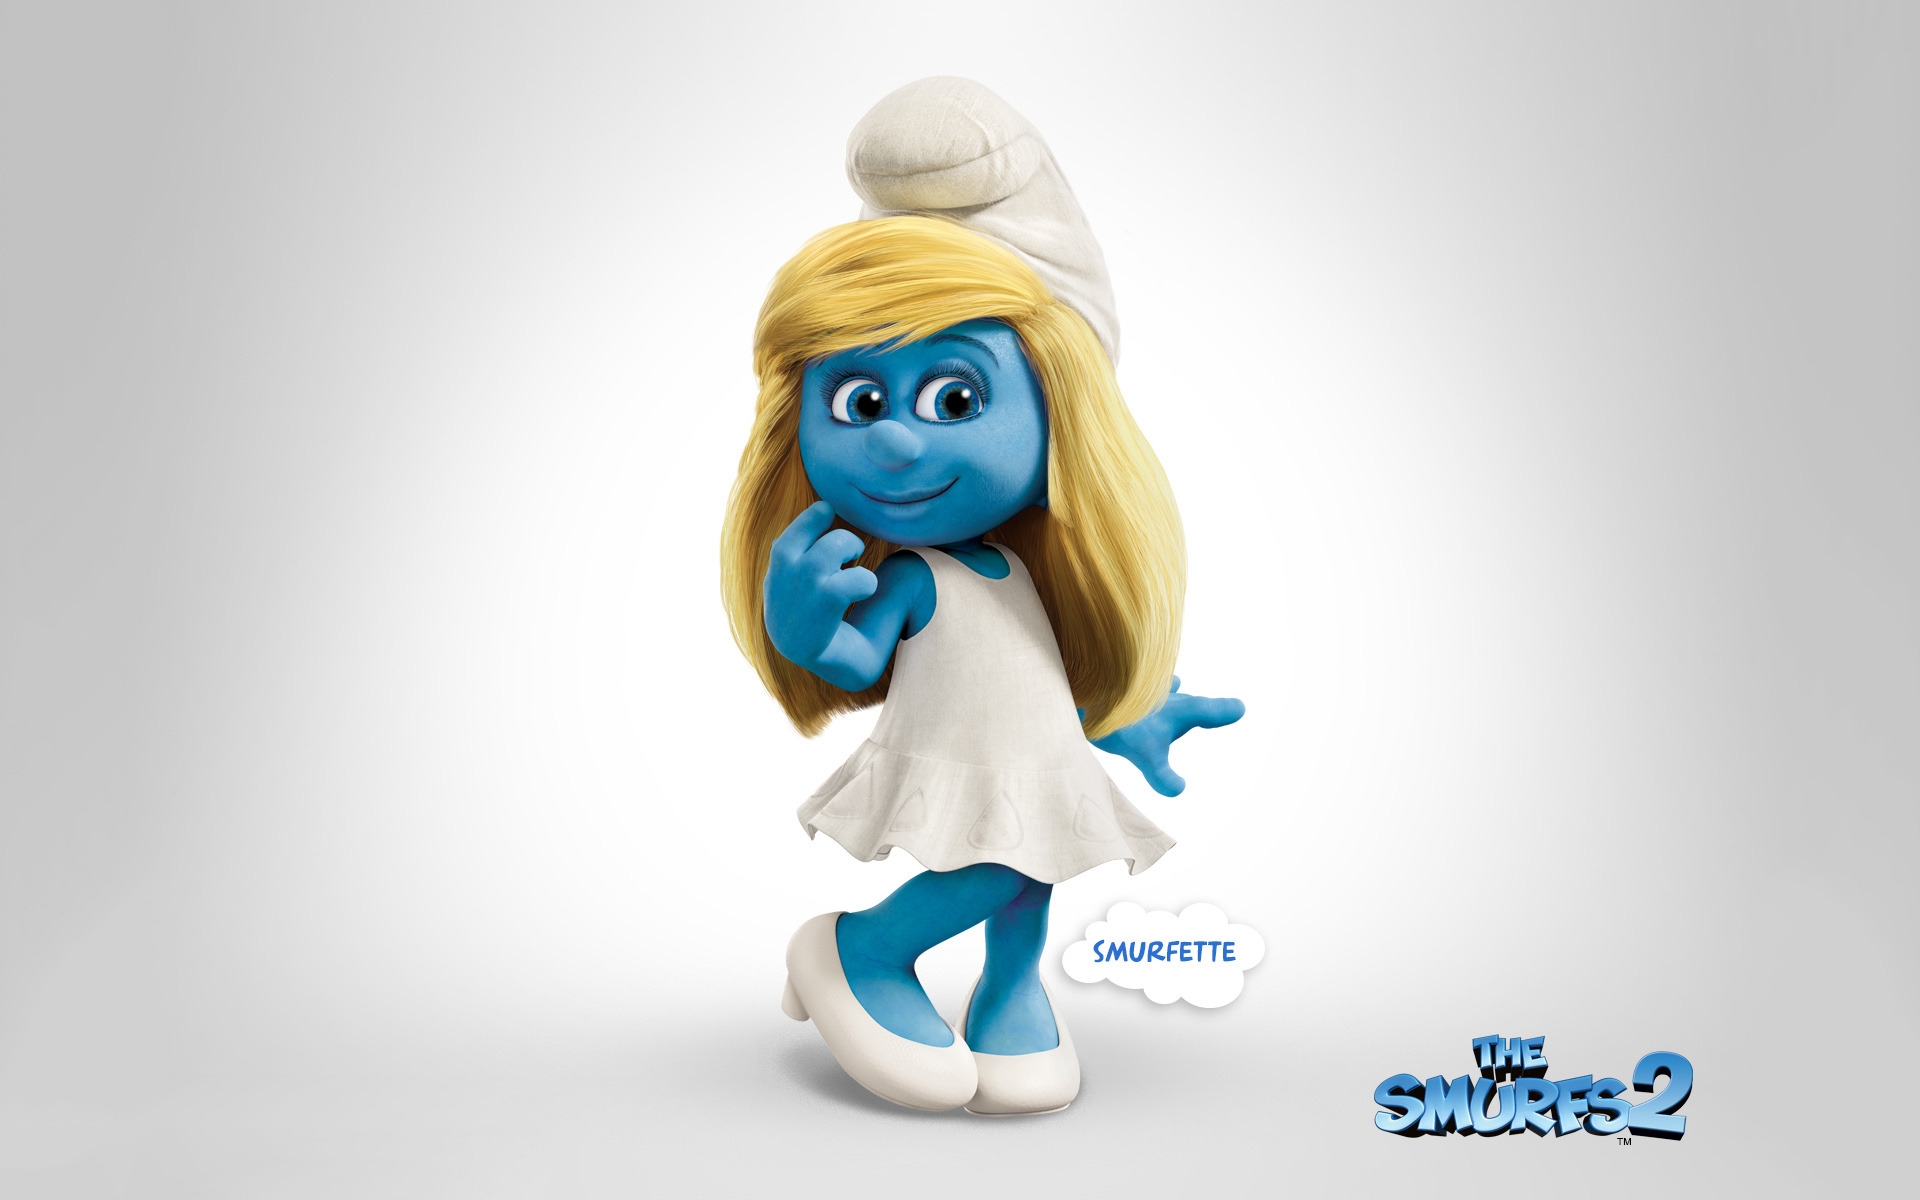 Smurfette The Smurfs 2 for 1920 x 1200 widescreen resolution